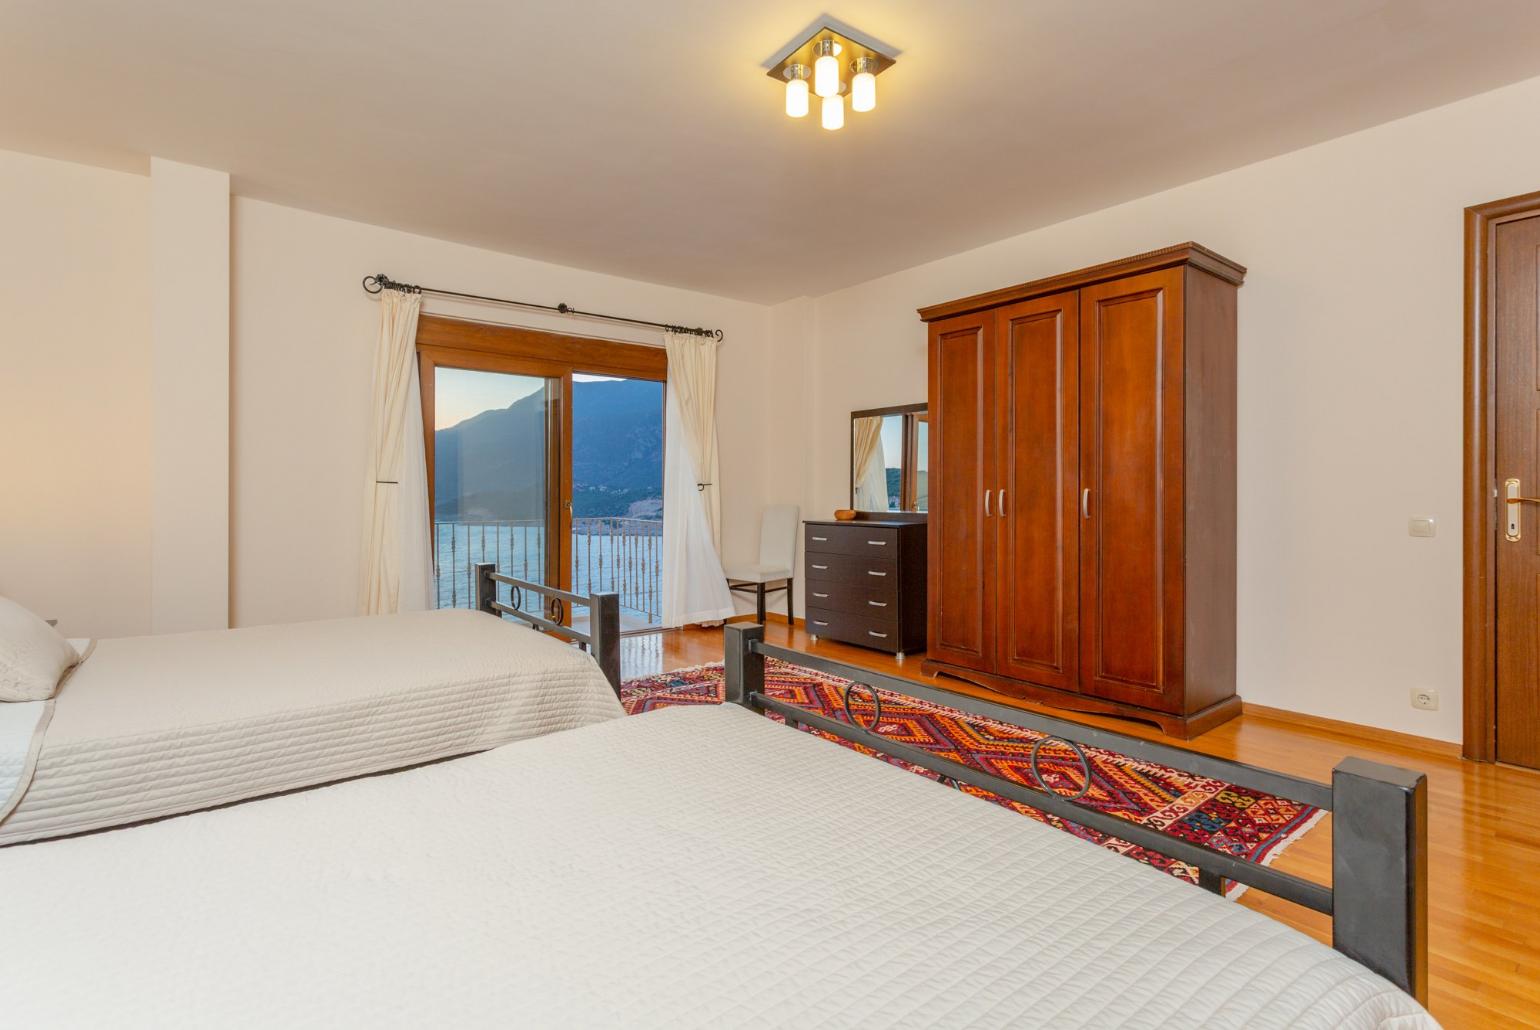 Twin bedroom with en suite bathroom, A/C, and panoramic sea views